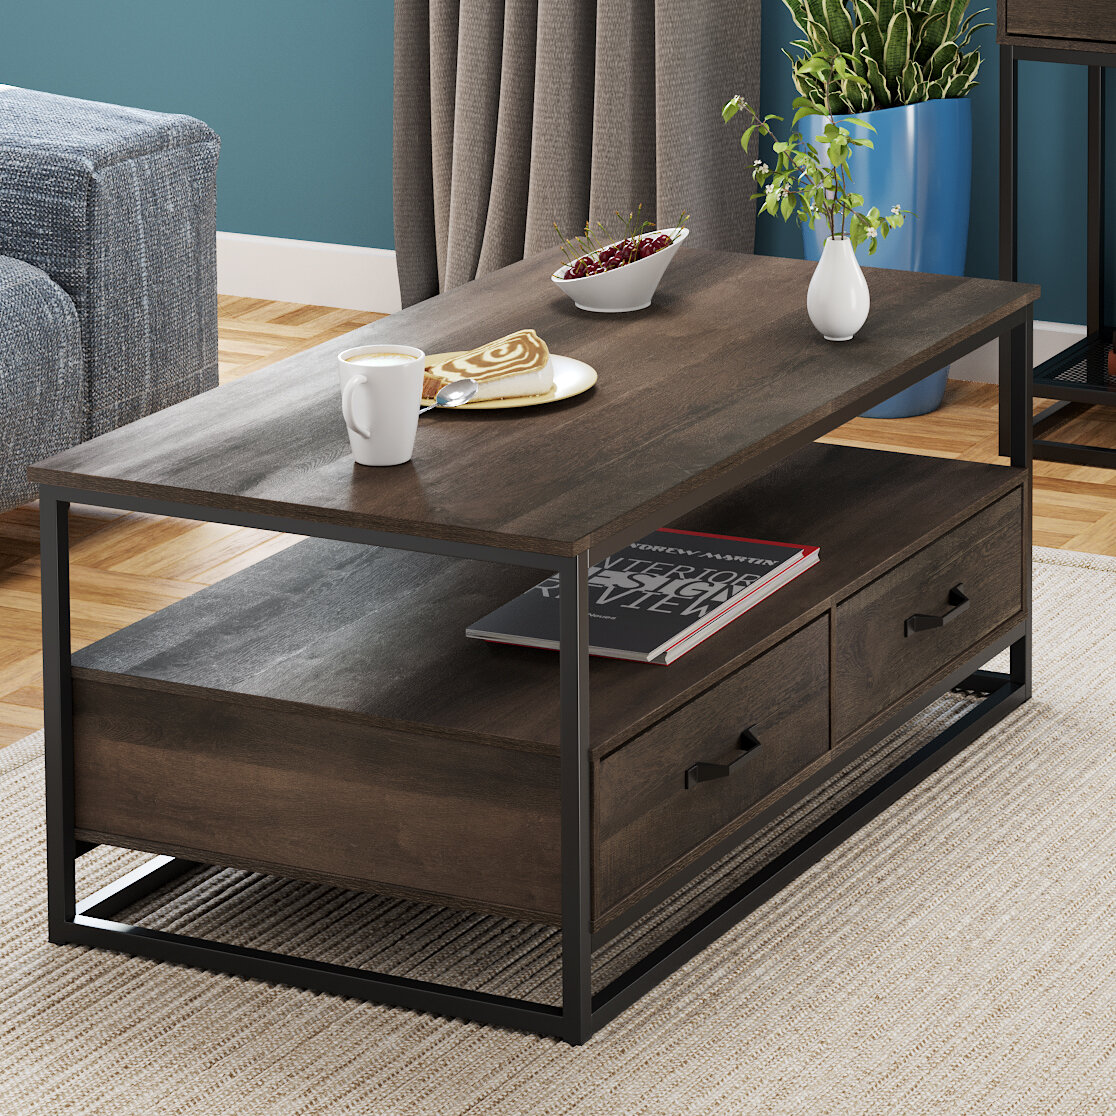 Southside Frame Coffee Table with Storage Union Rustic Color: Dark Brown